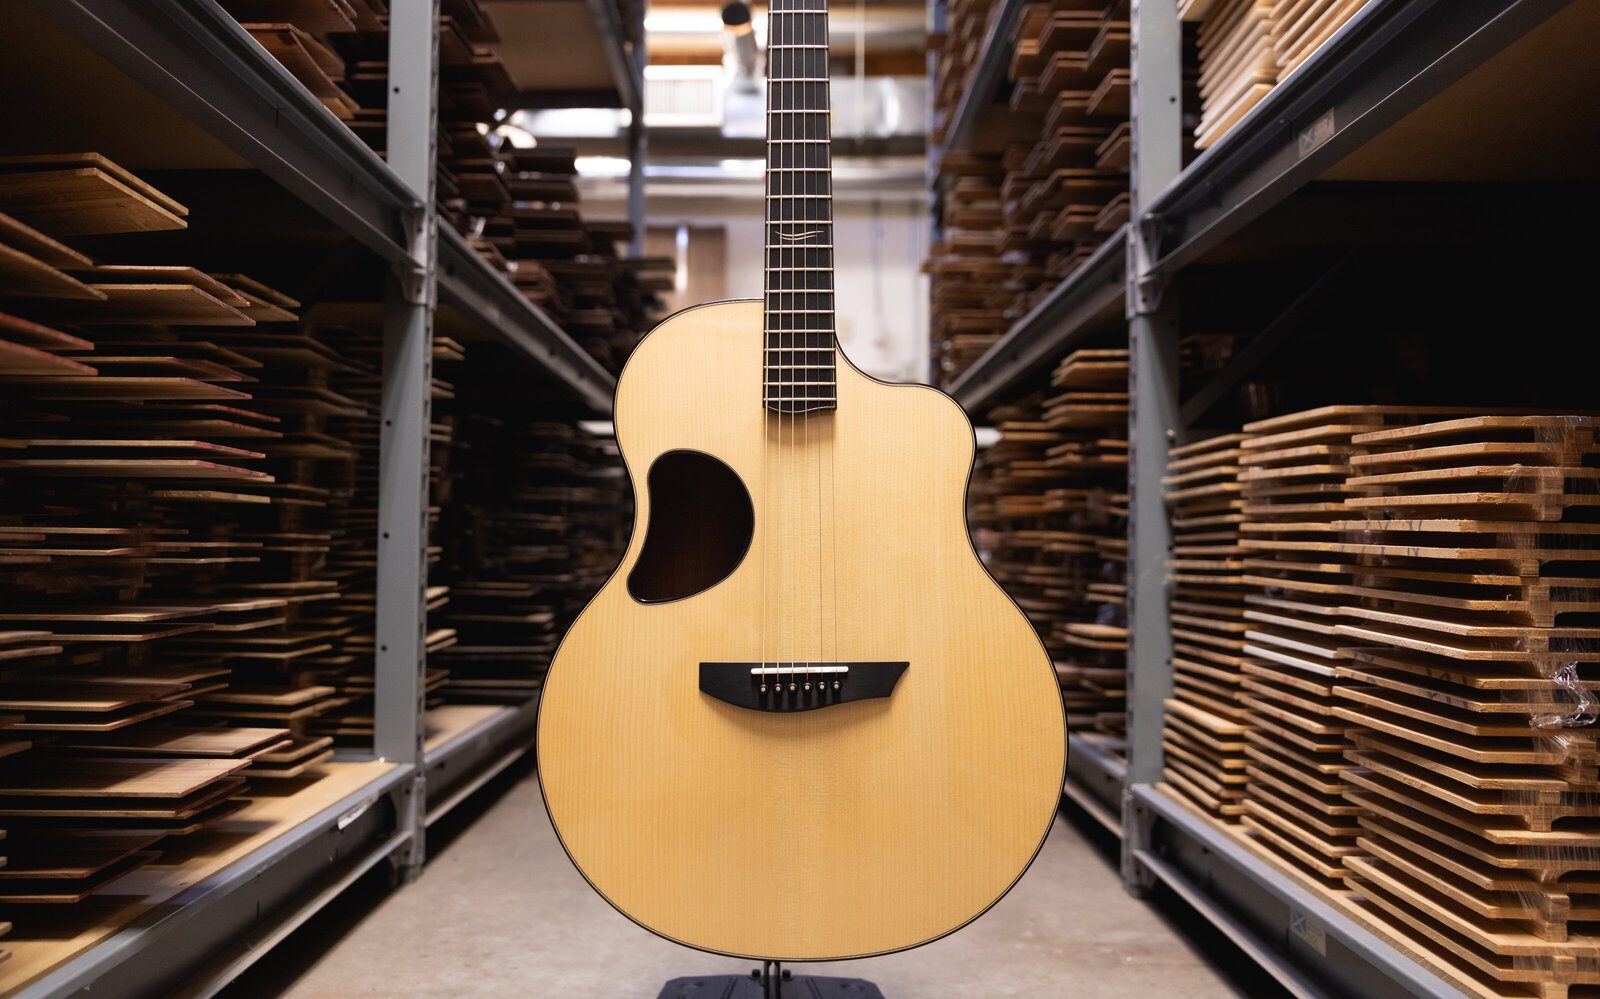 Acoustic guitars made from the best woods in the world